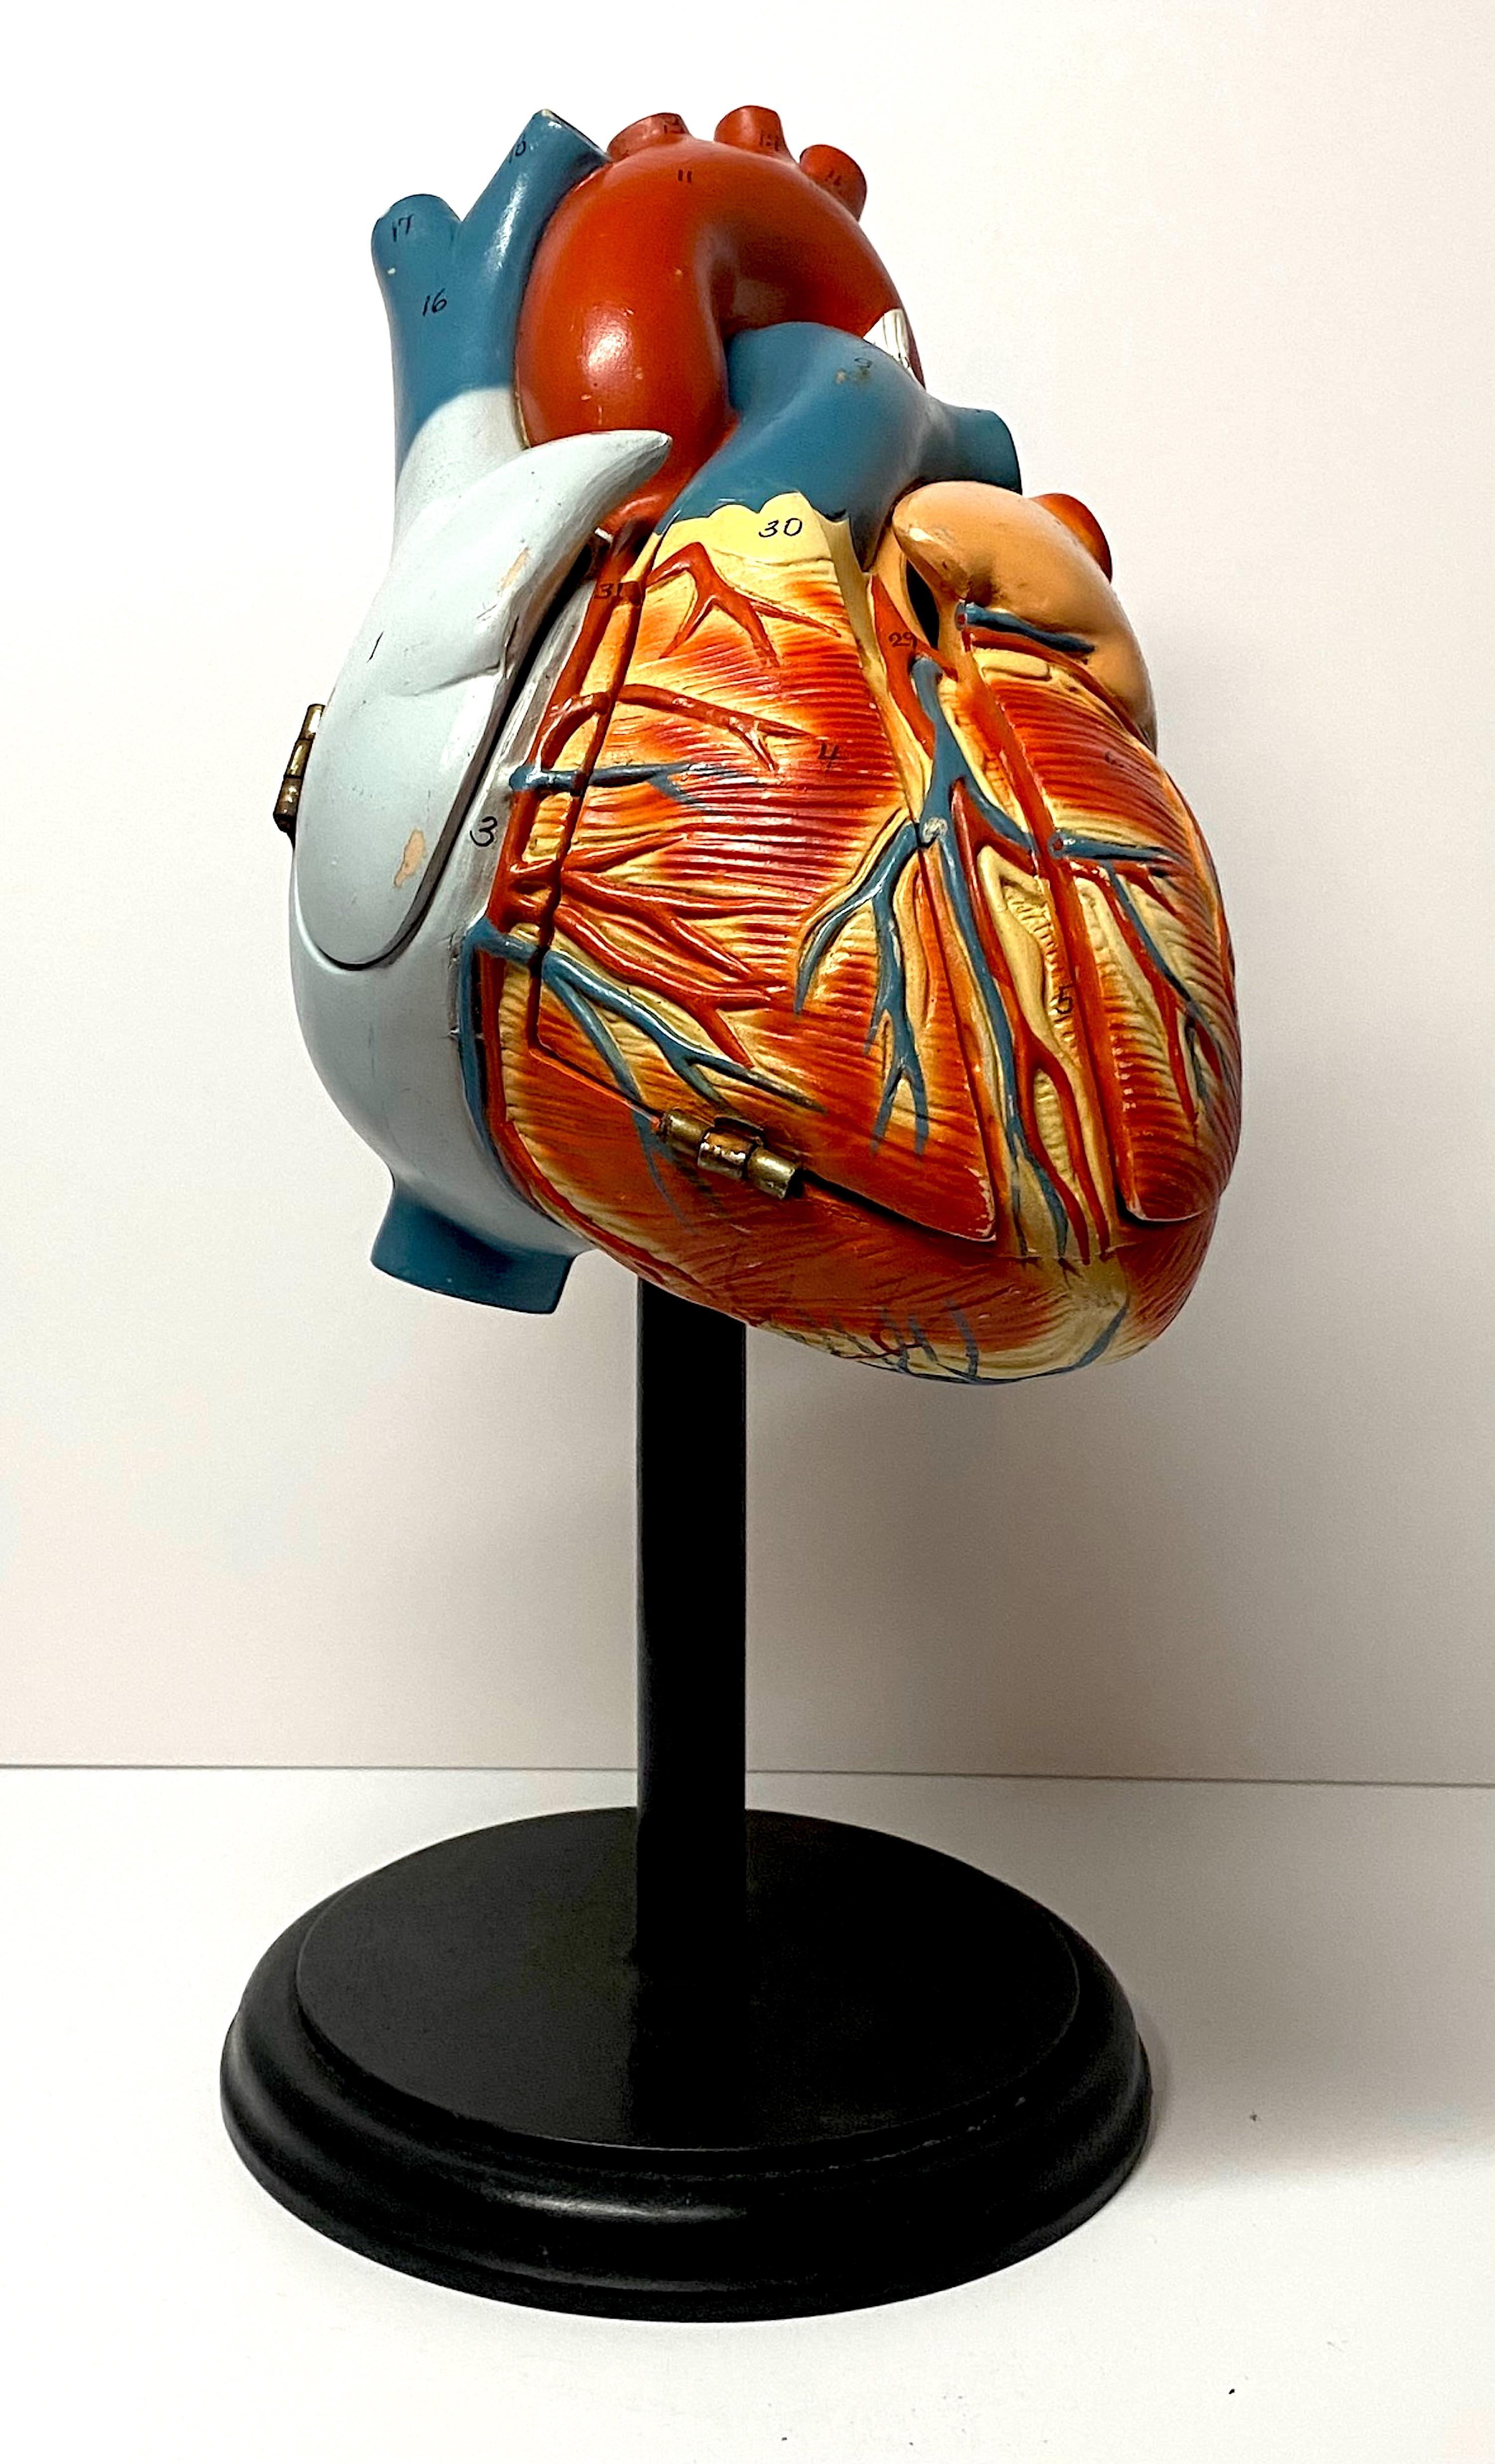 A circa 1940s to mid 1950s large anatomical model of the human heart used to teach anatomy in medical school. Hand painted in multi color mat enamel with all the chambers and parts of the heart numbered. Three hinged door on the heart open to show